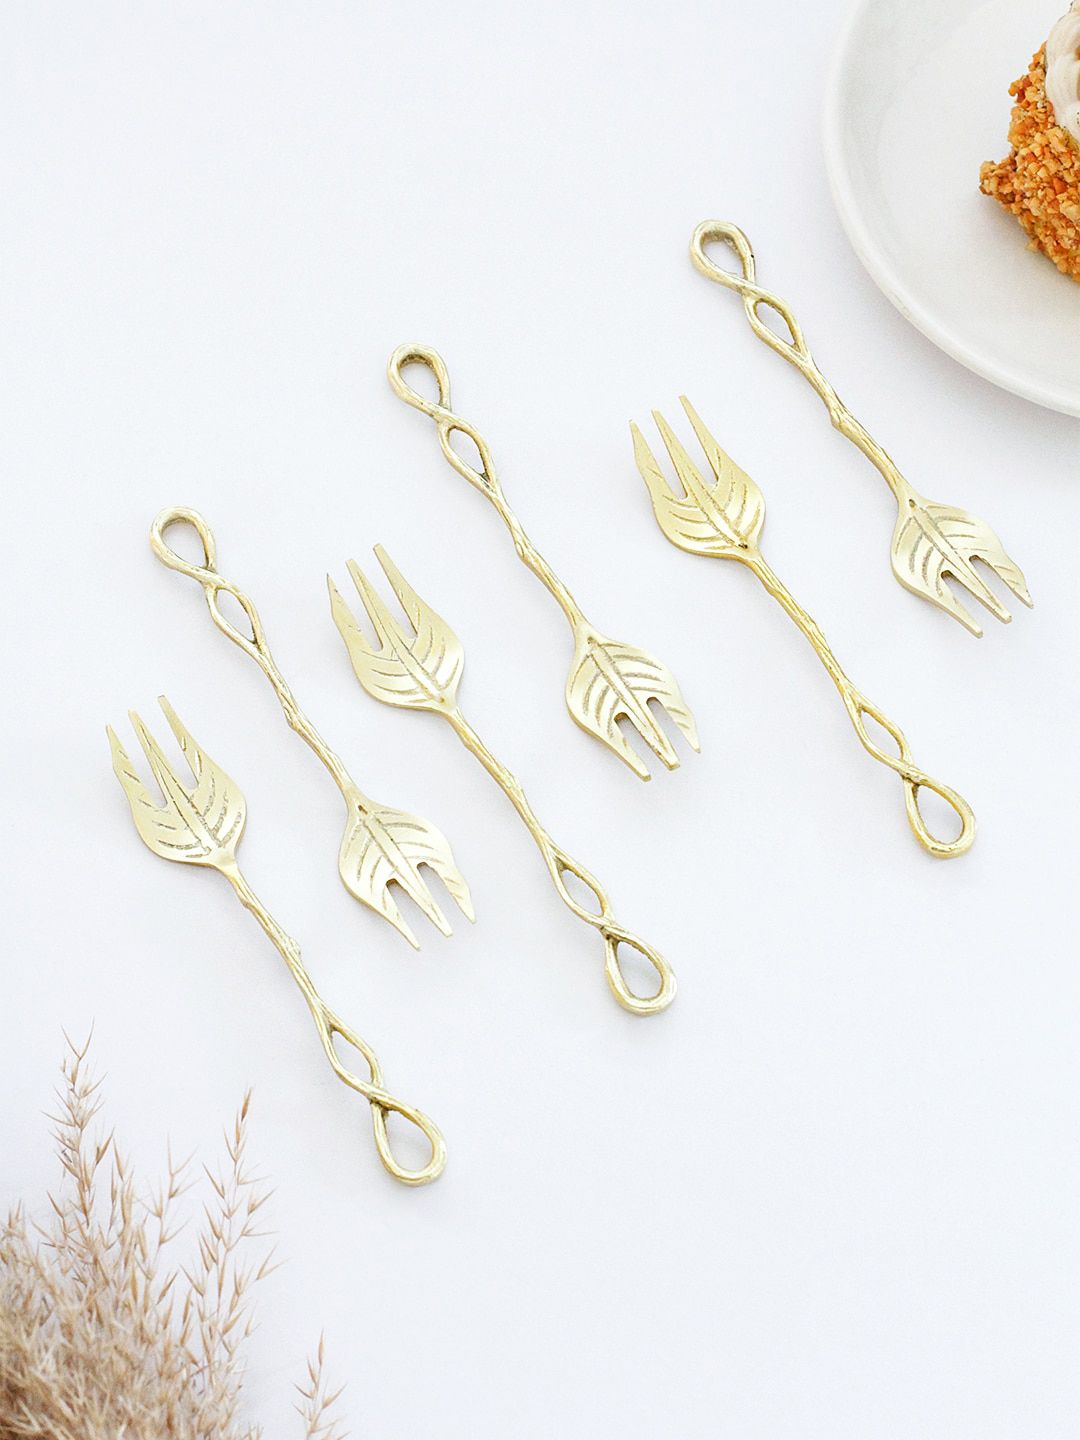 The Wishing Chair Set Of 6 Gold-Toned Solid We Heart It Dessert Forks Price in India